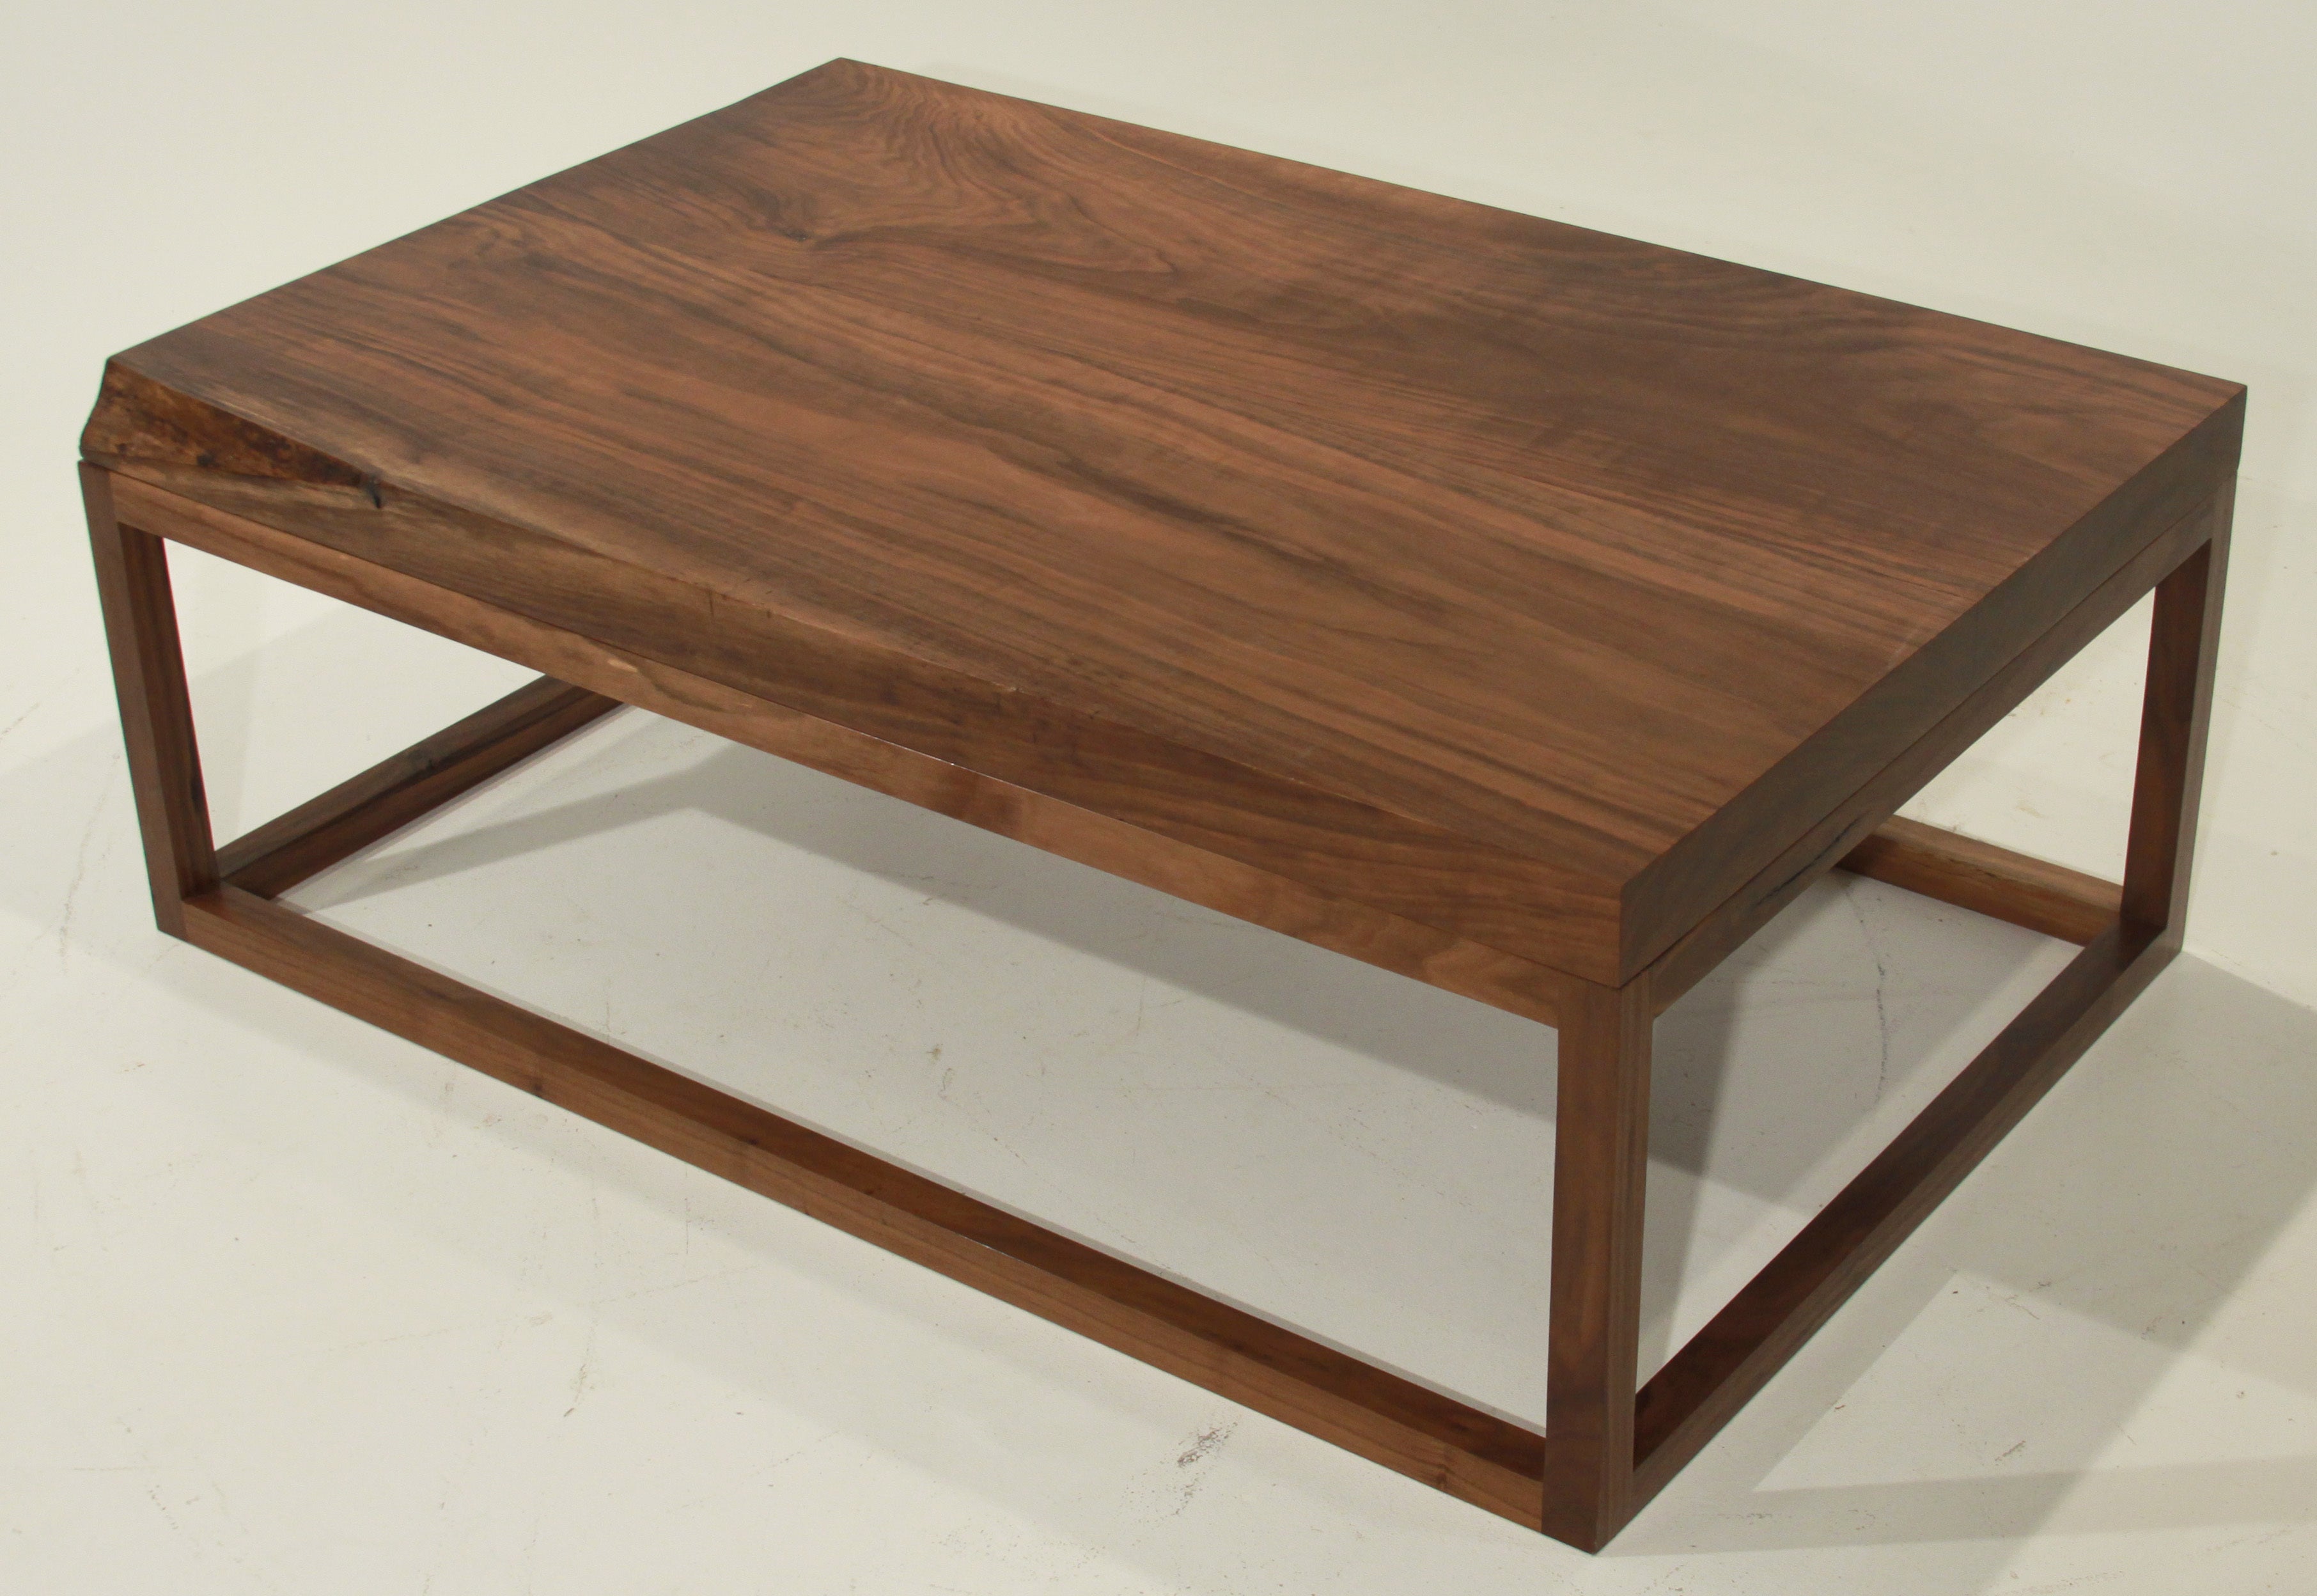 The Basic Coffee Table in Walnut with live edges by Thomas Hayes Studio